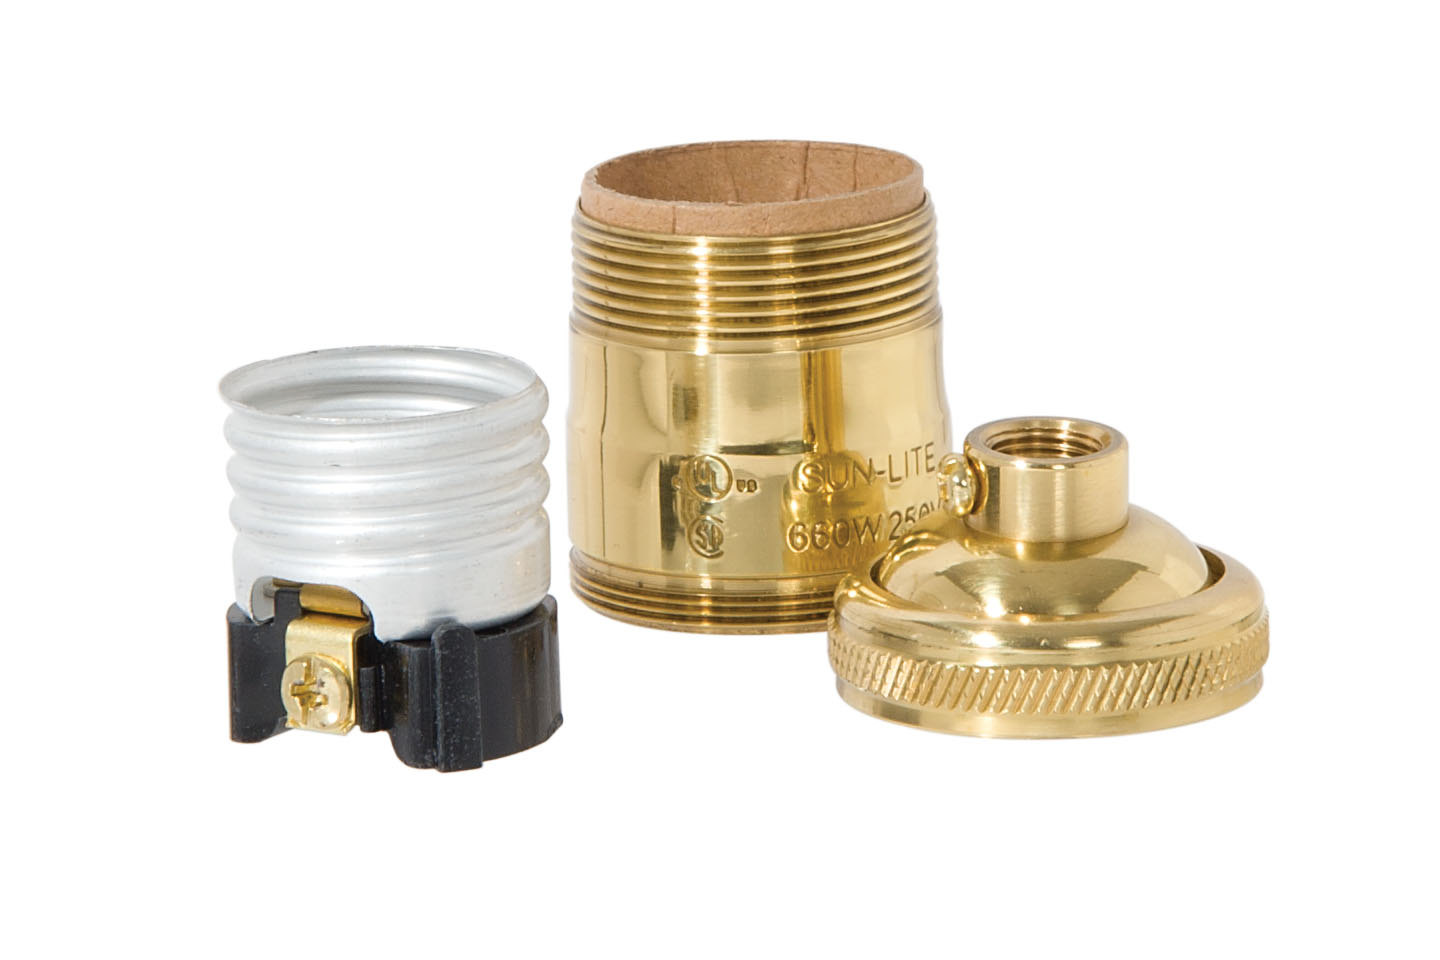 Polished & Lacquered Finish, Heavy Turned Brass Keyless Socket, UNO Thread Shell